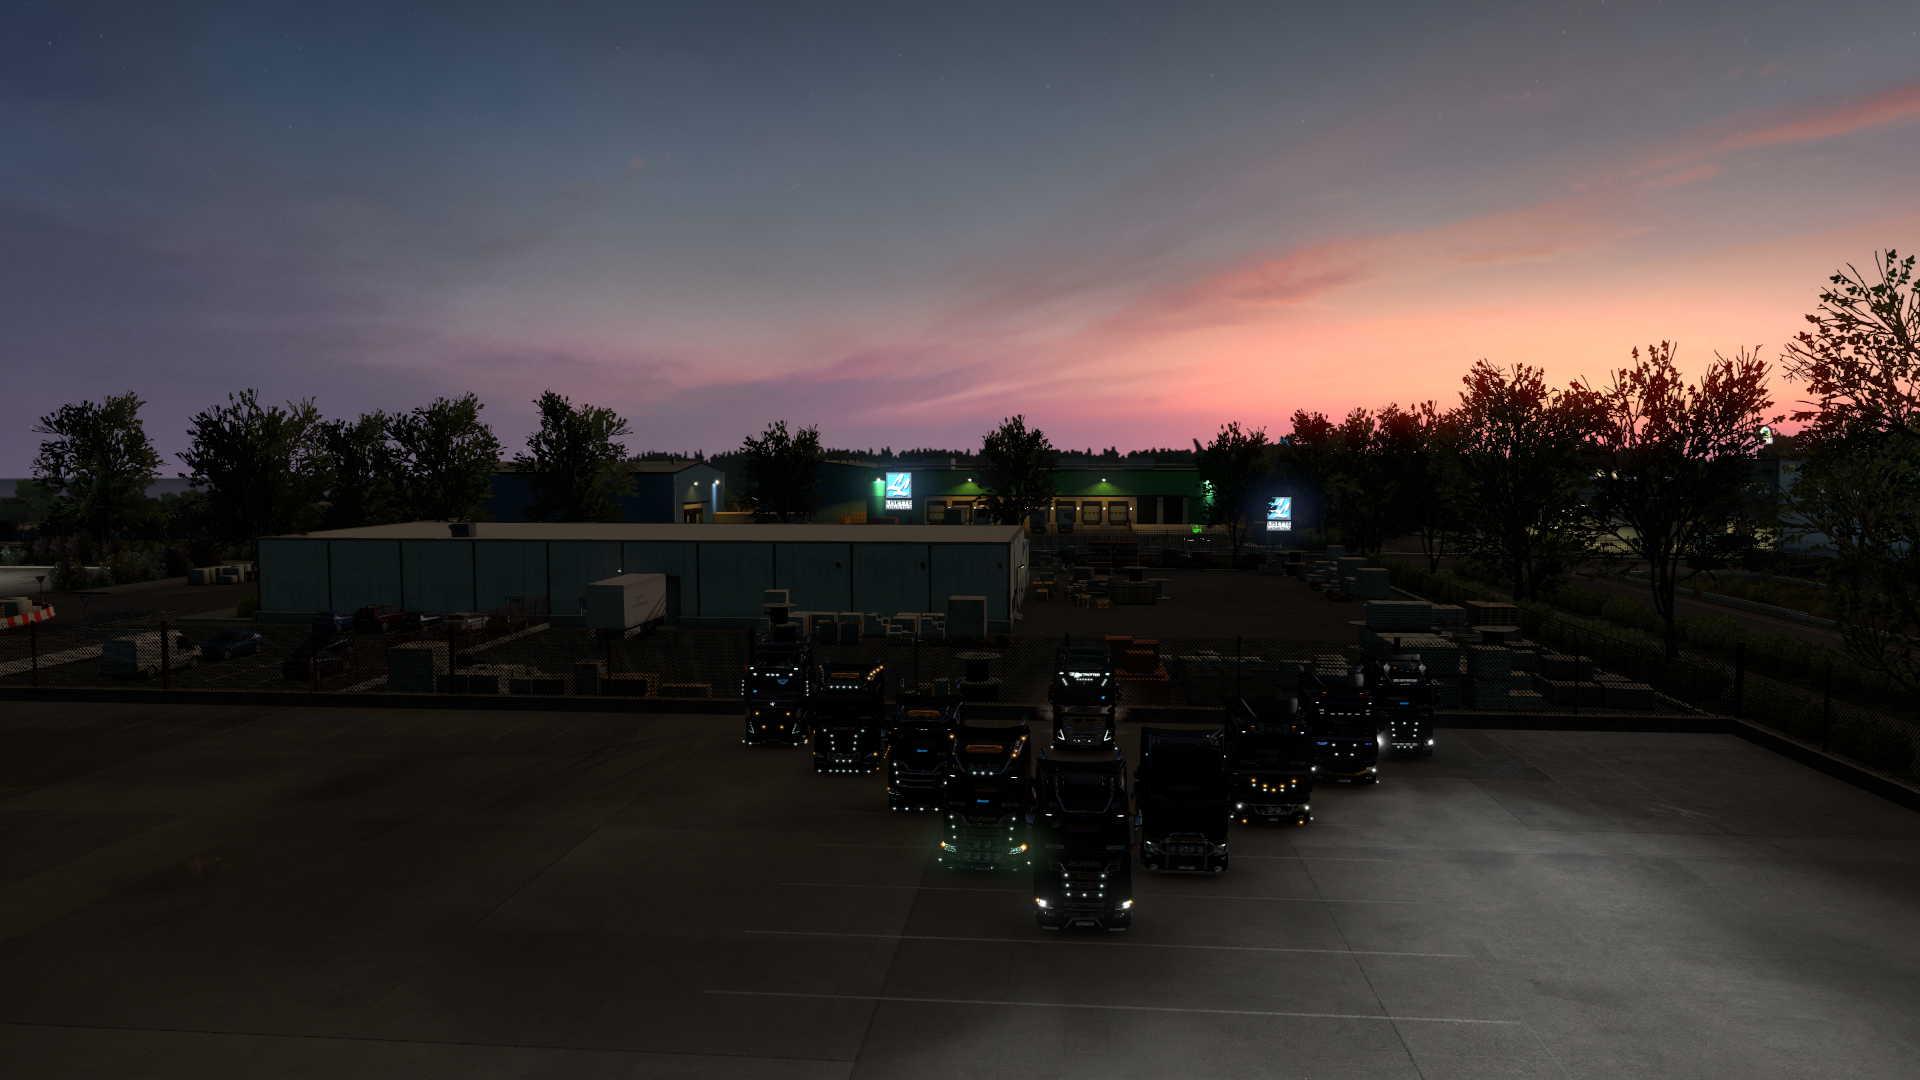 ets2_20210404_011531_00.png